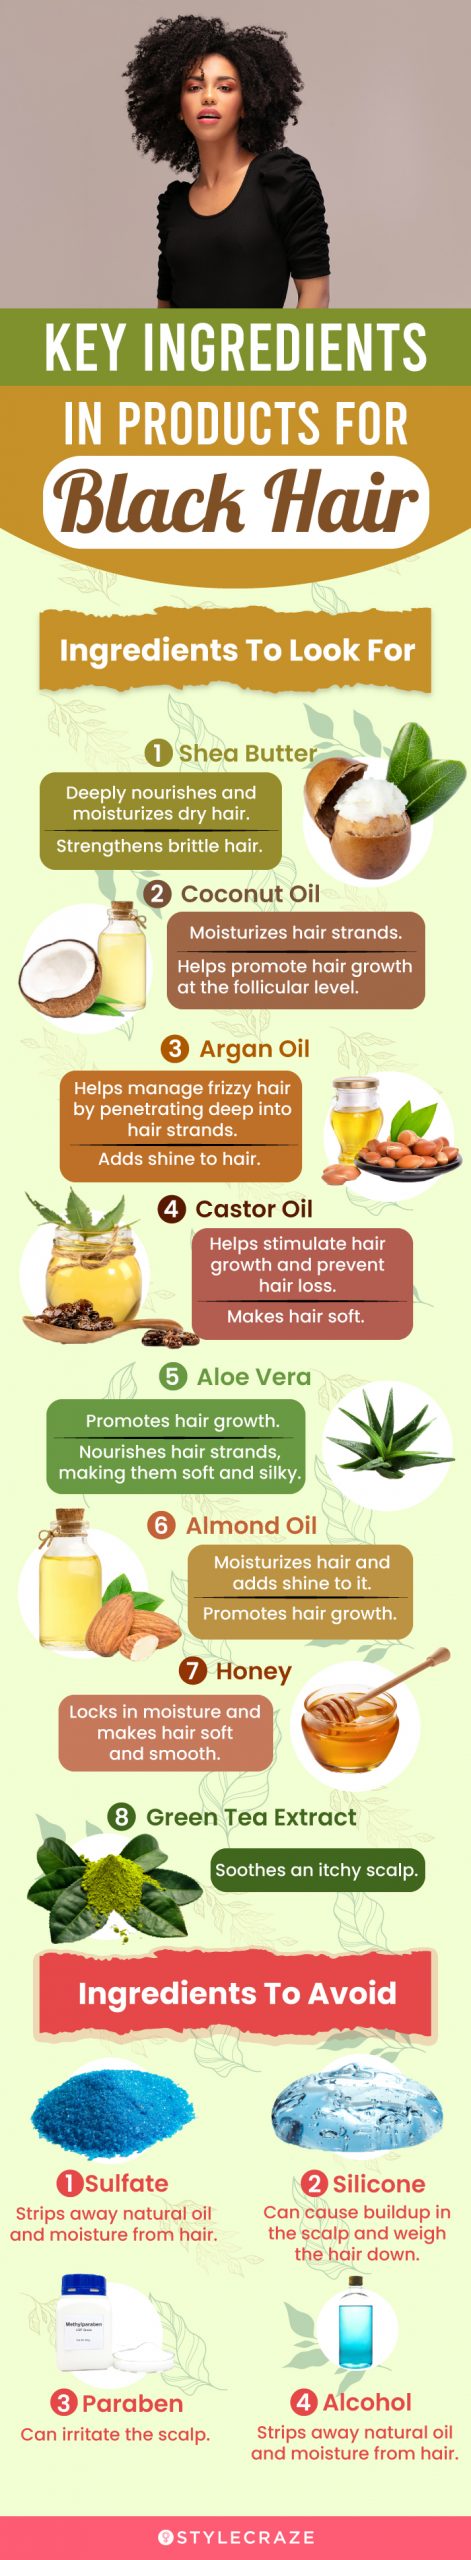 Key Ingredients For African American Black Hair (infographic)